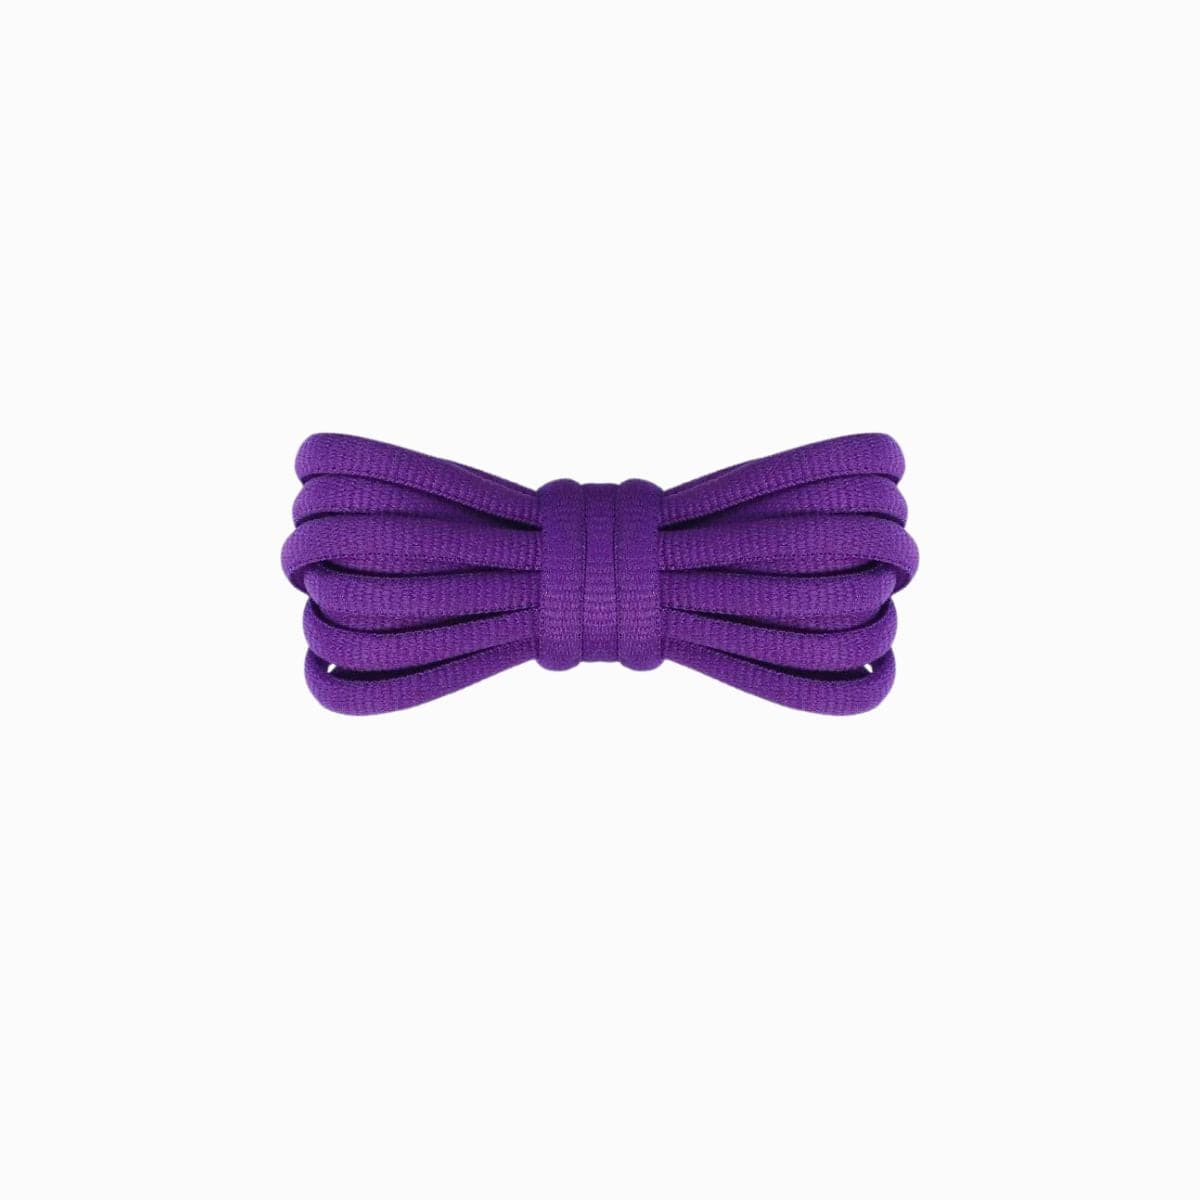 Purple Replacement Adidas Shoe Laces for Adidas Spezial Sneakers by Kicks Shoelaces